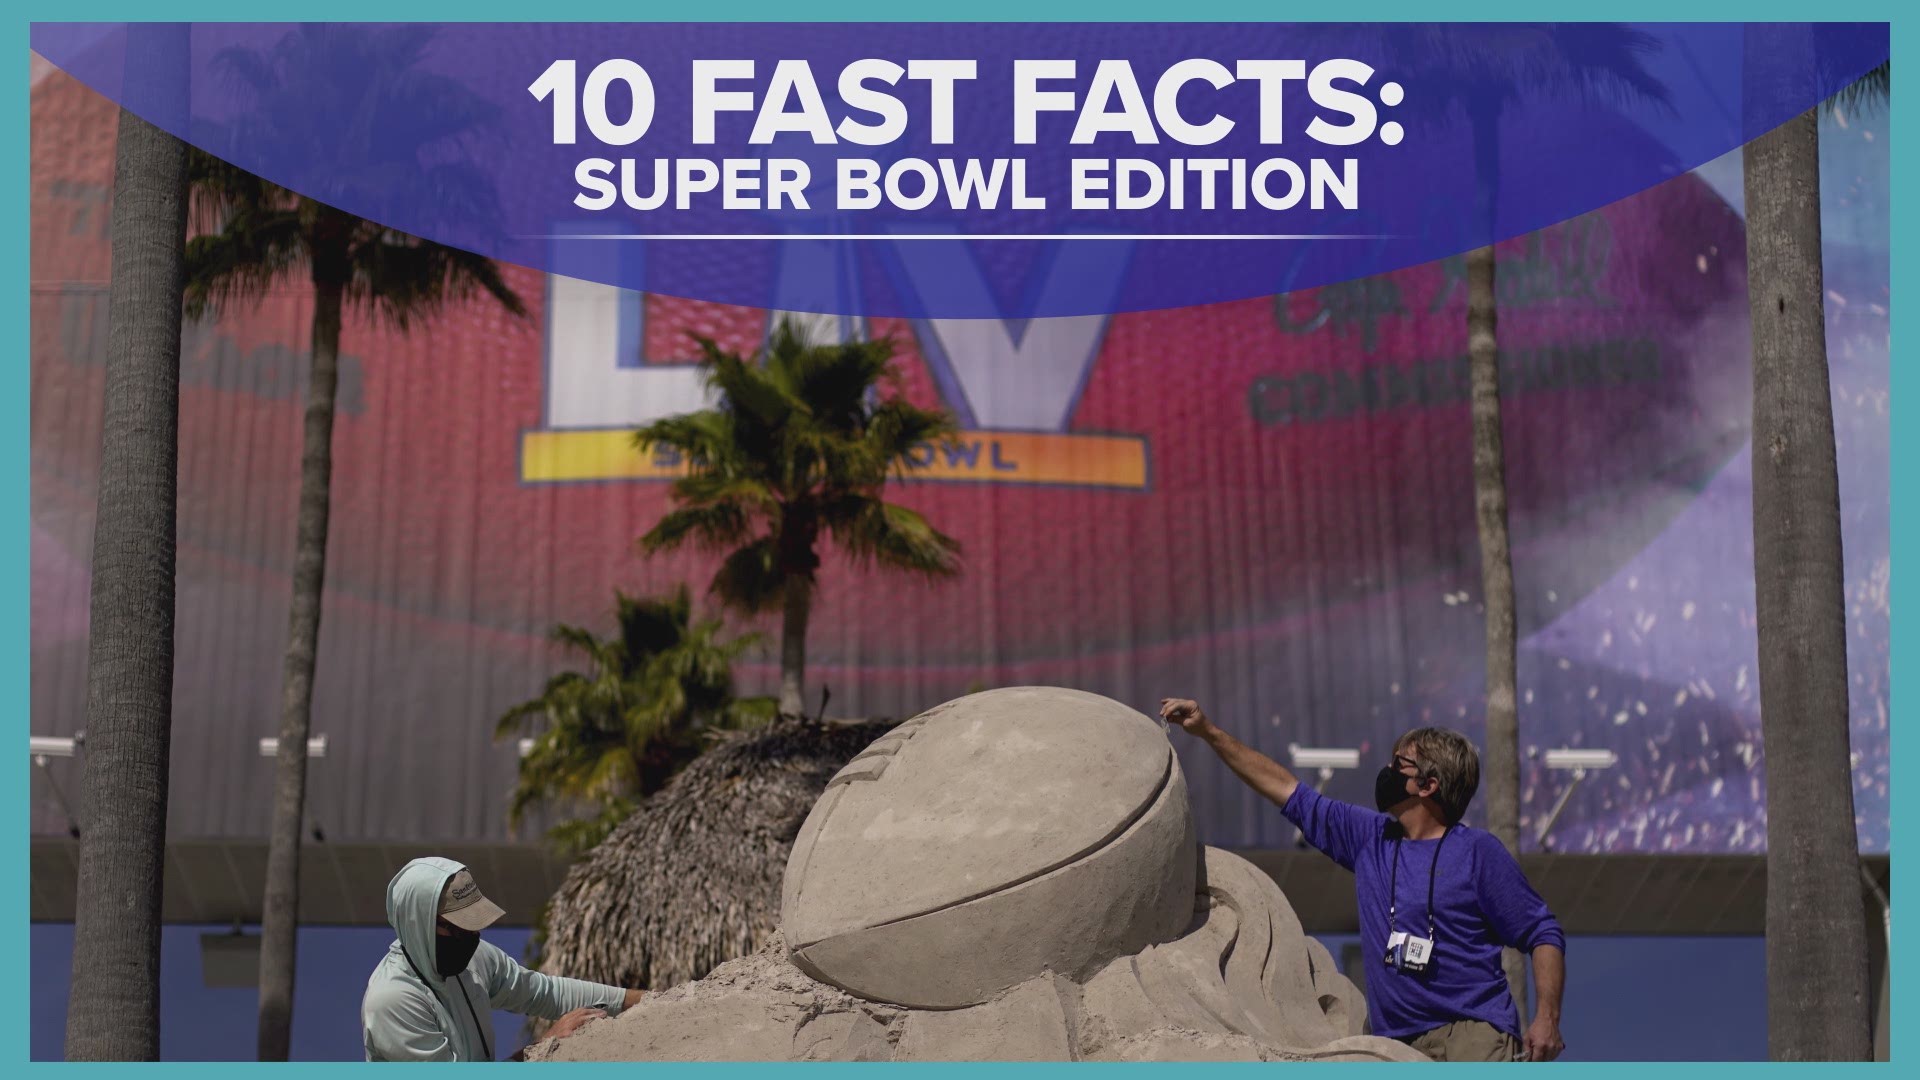 Did Reddit's 5-second Ad Win Super Bowl LV? Marketers Pick Their Favorites